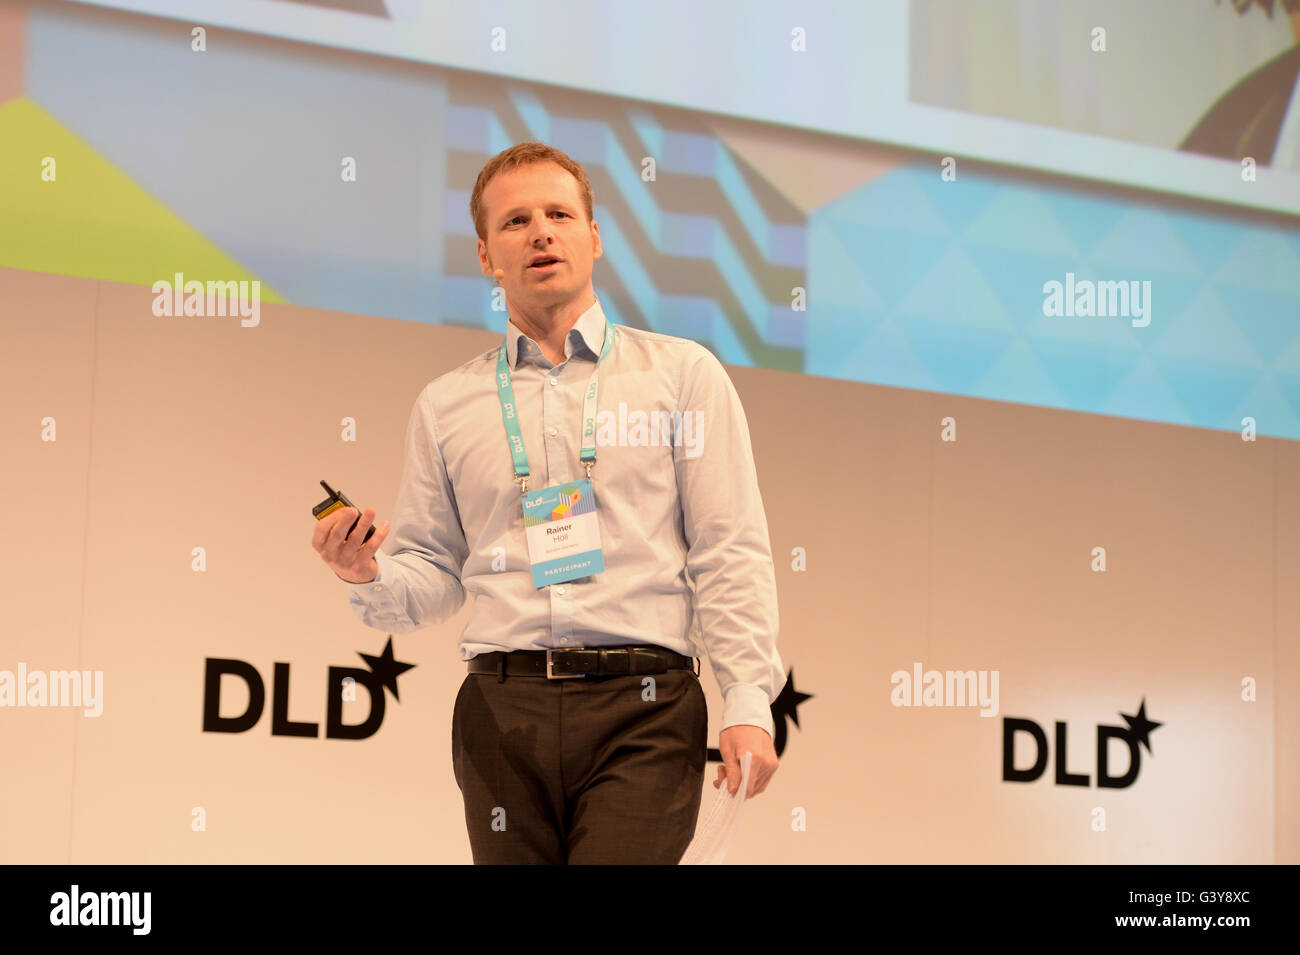 MUNICH/GERMANY - JUNE 16: Rainer Höll (Ashoka Germany ) gestures onstage during the DLDsummer Conference 2016 at Haus der Kunst, Munich. DLDsummer takes place June 16-17, 2016 and focuses on the changing through digitalization in the areas of life, work and business (Photo: picture alliance for DLD/Jan Haas) | usage worldwide Stock Photo